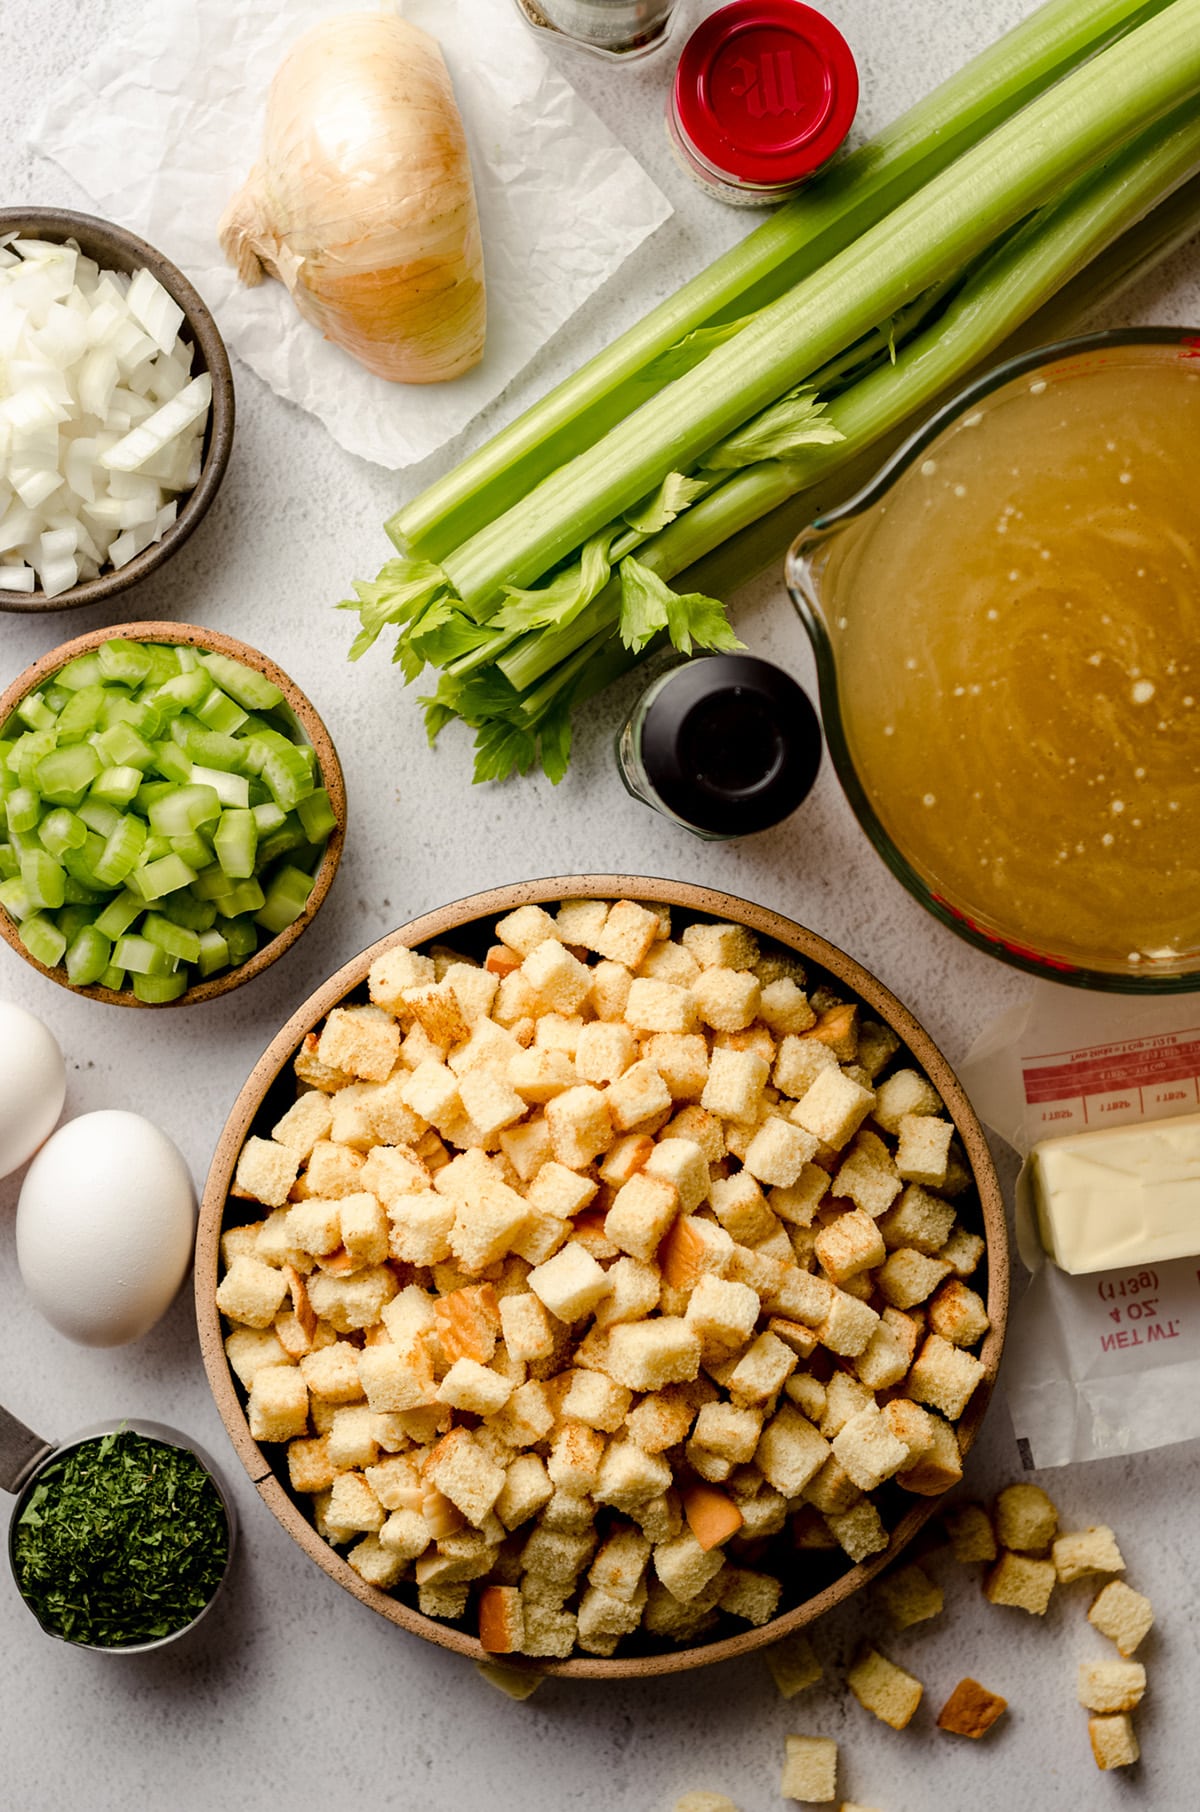 ingredients for traditional bread stuffing